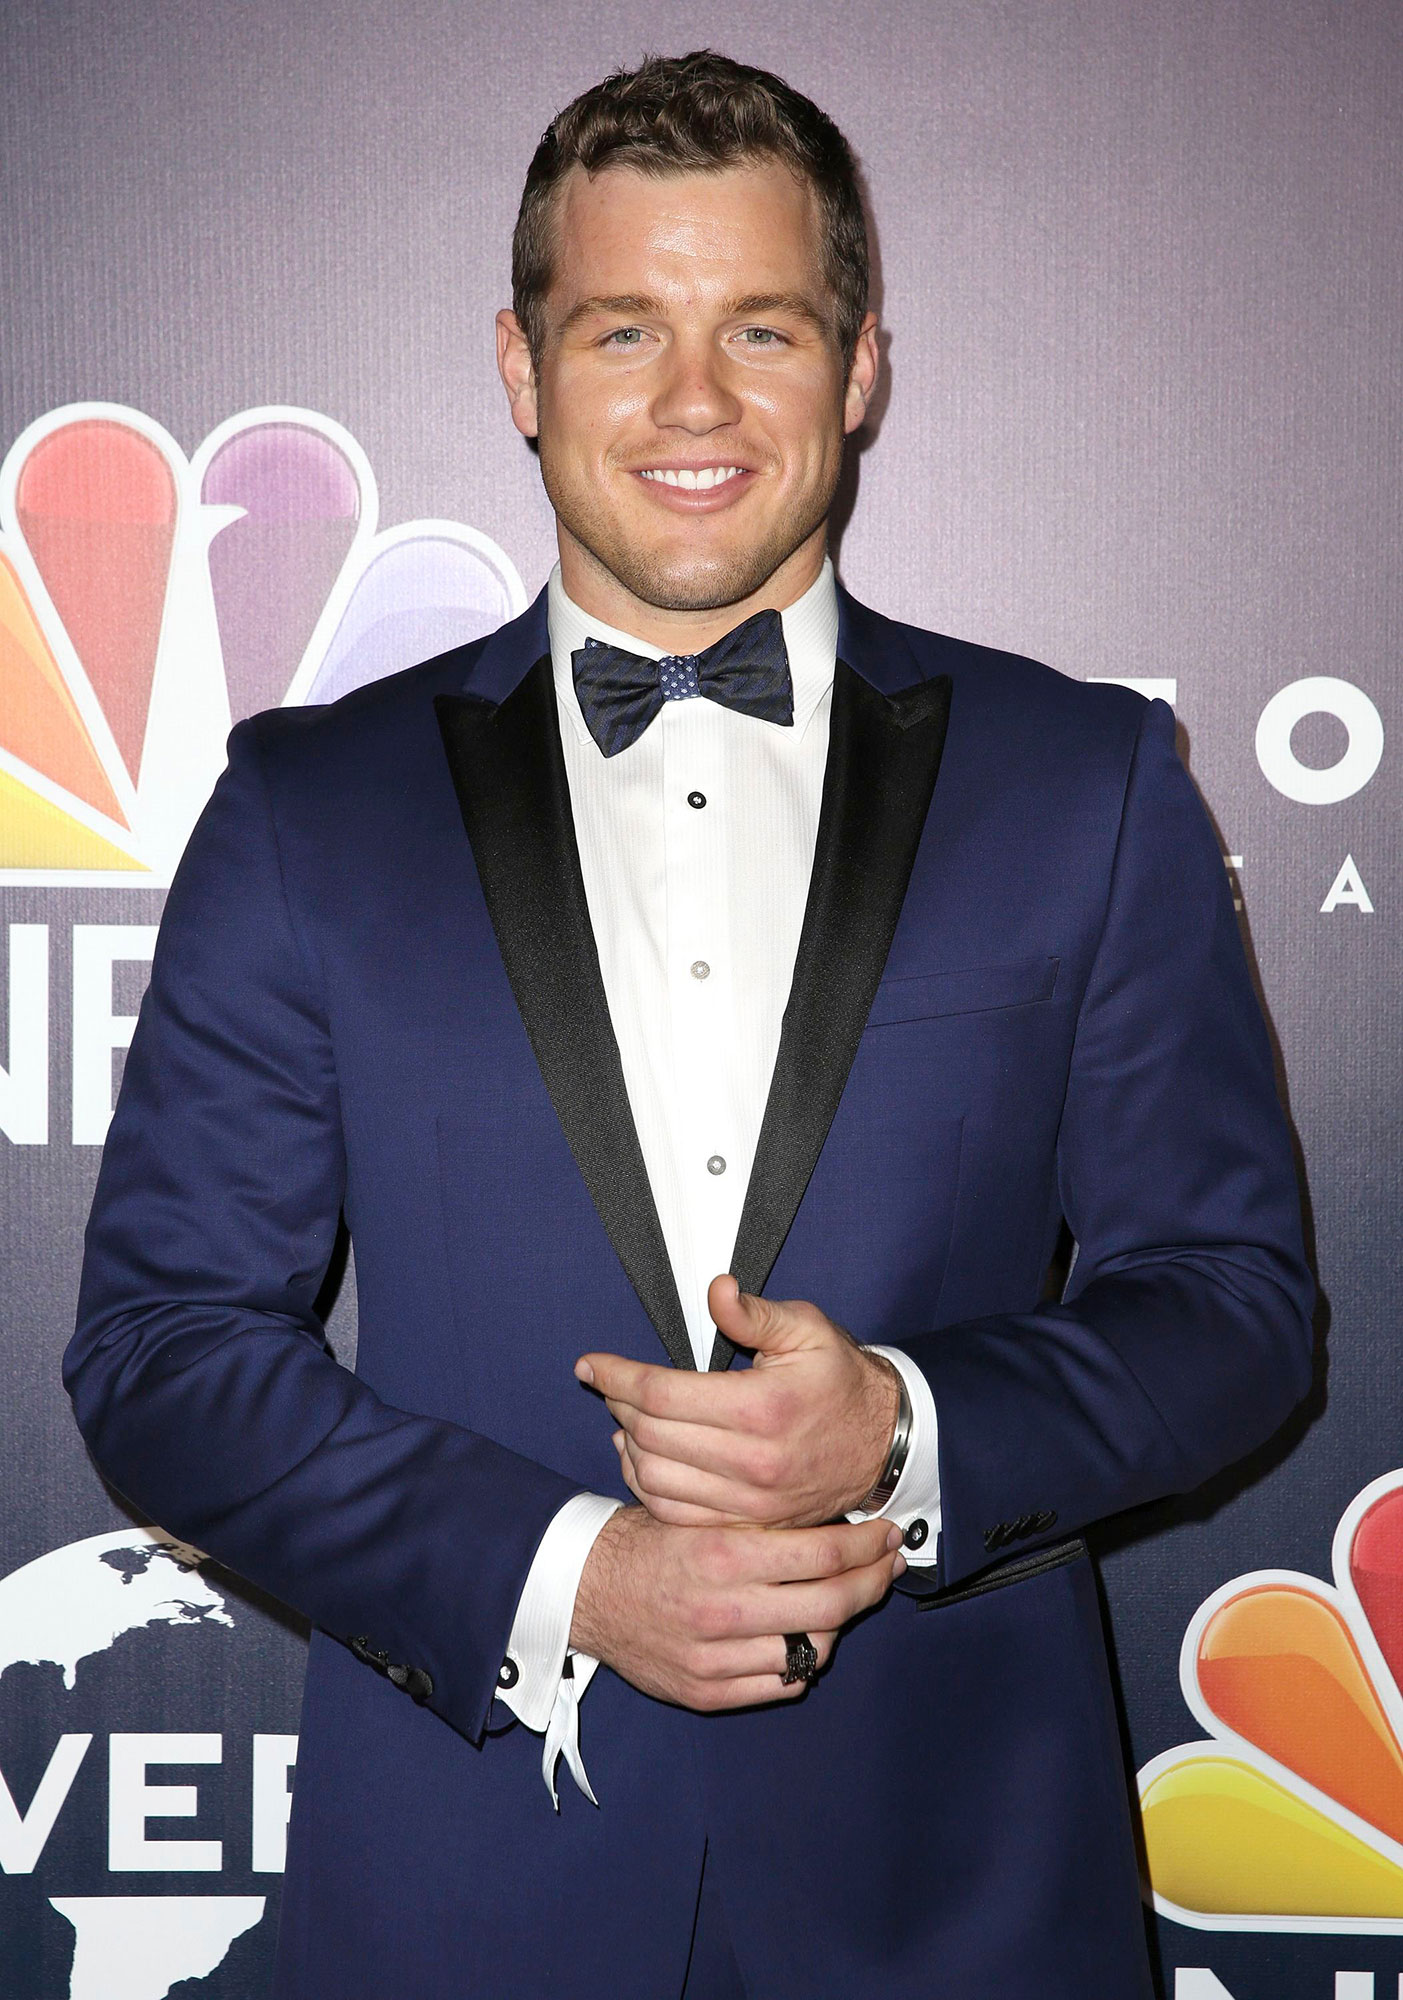 Colton Underwood Was Suicidal Before Coming Out as Gay Revelations